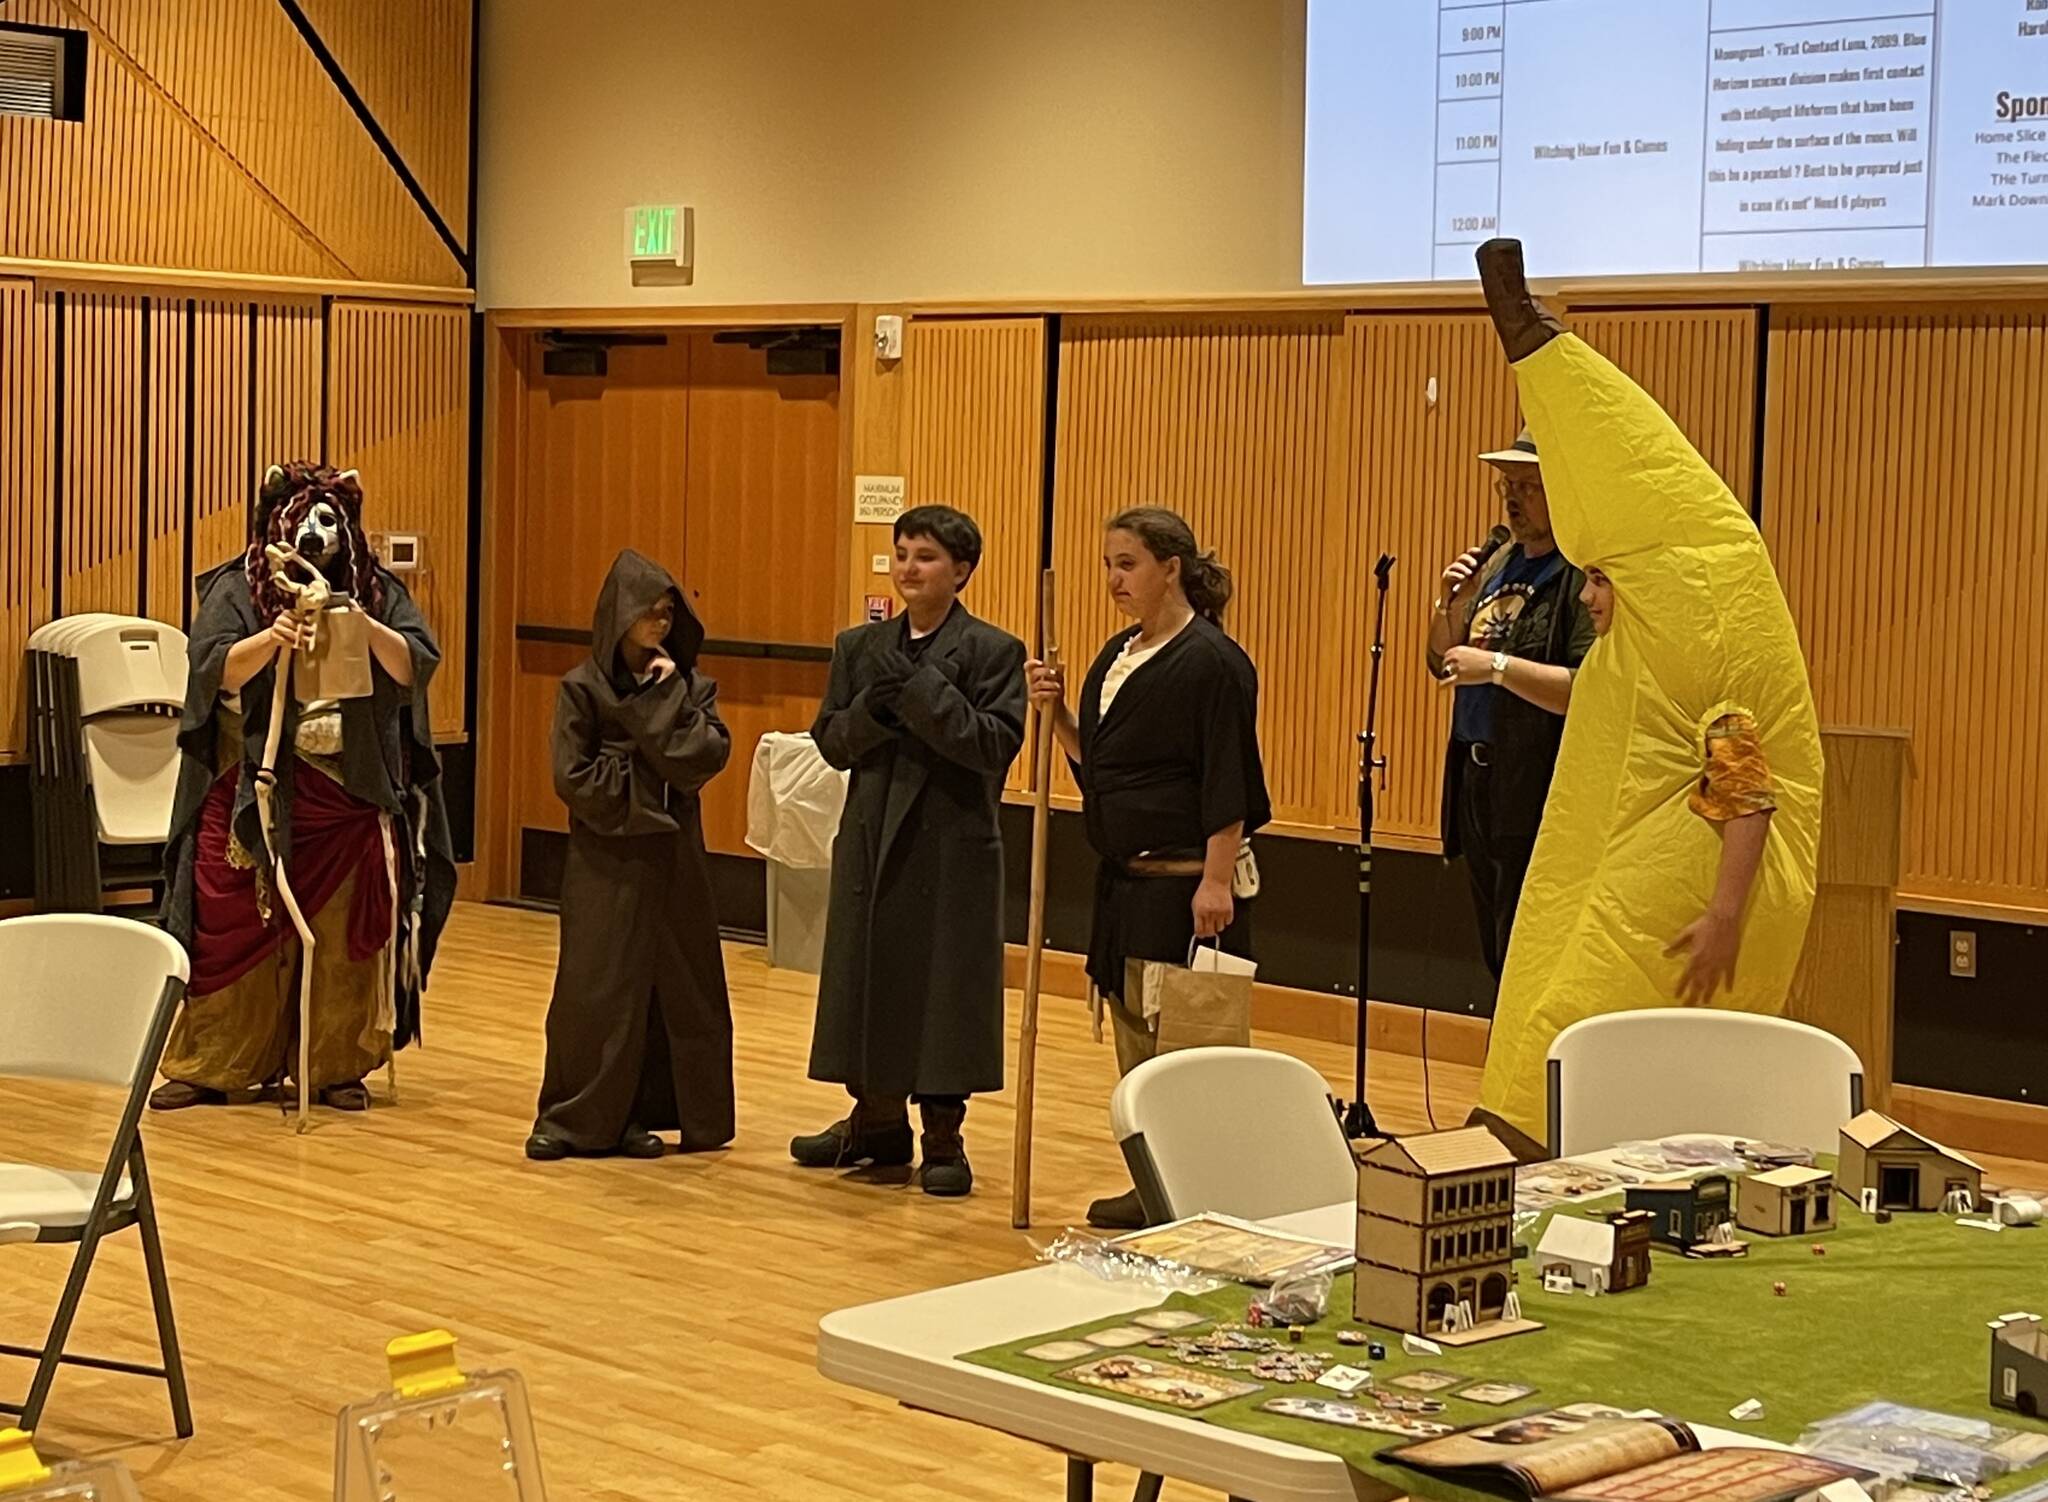 The costume contest Alice Ryan on the left, followed by Logan, Gabe, and Brenna Riggan, and Harmon (pictured in the banana costume). This was the third annual cosplay/costume contest, first place went to Alice Ryan. Submitted photos